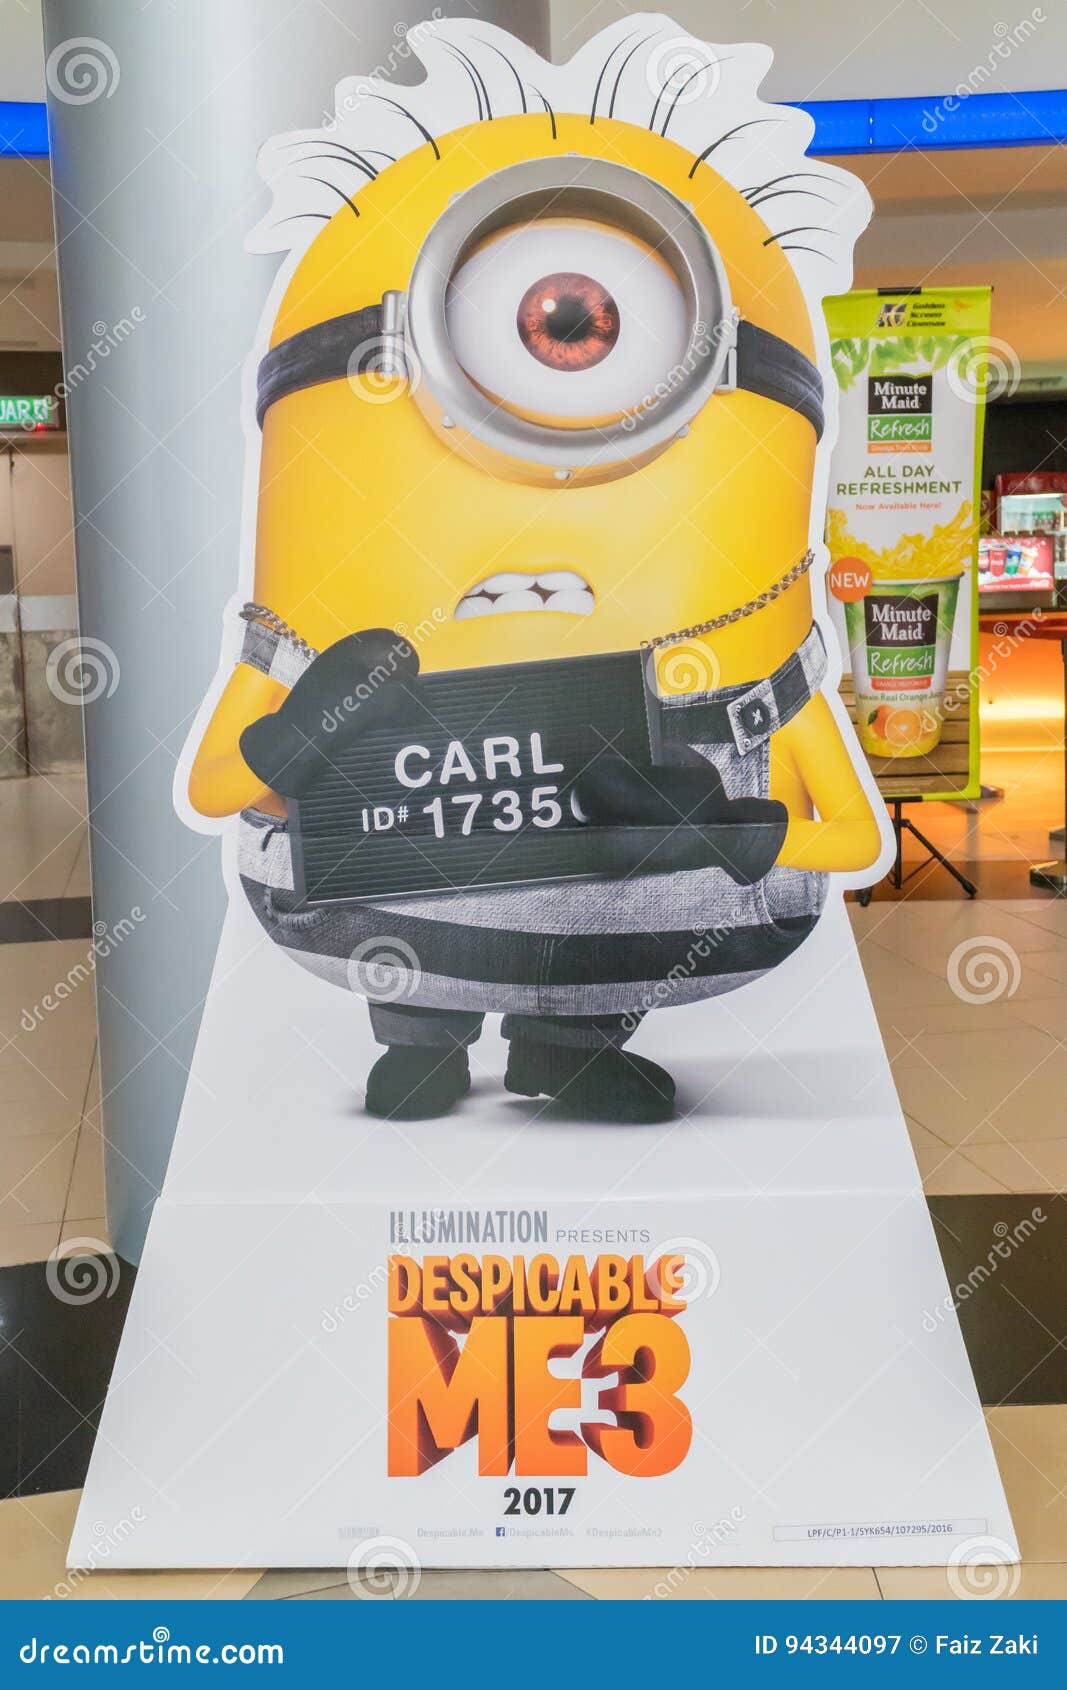 2017 Despicable Me 3 Computer Animated Comedy Movie Poster 12x18 24x36 inch